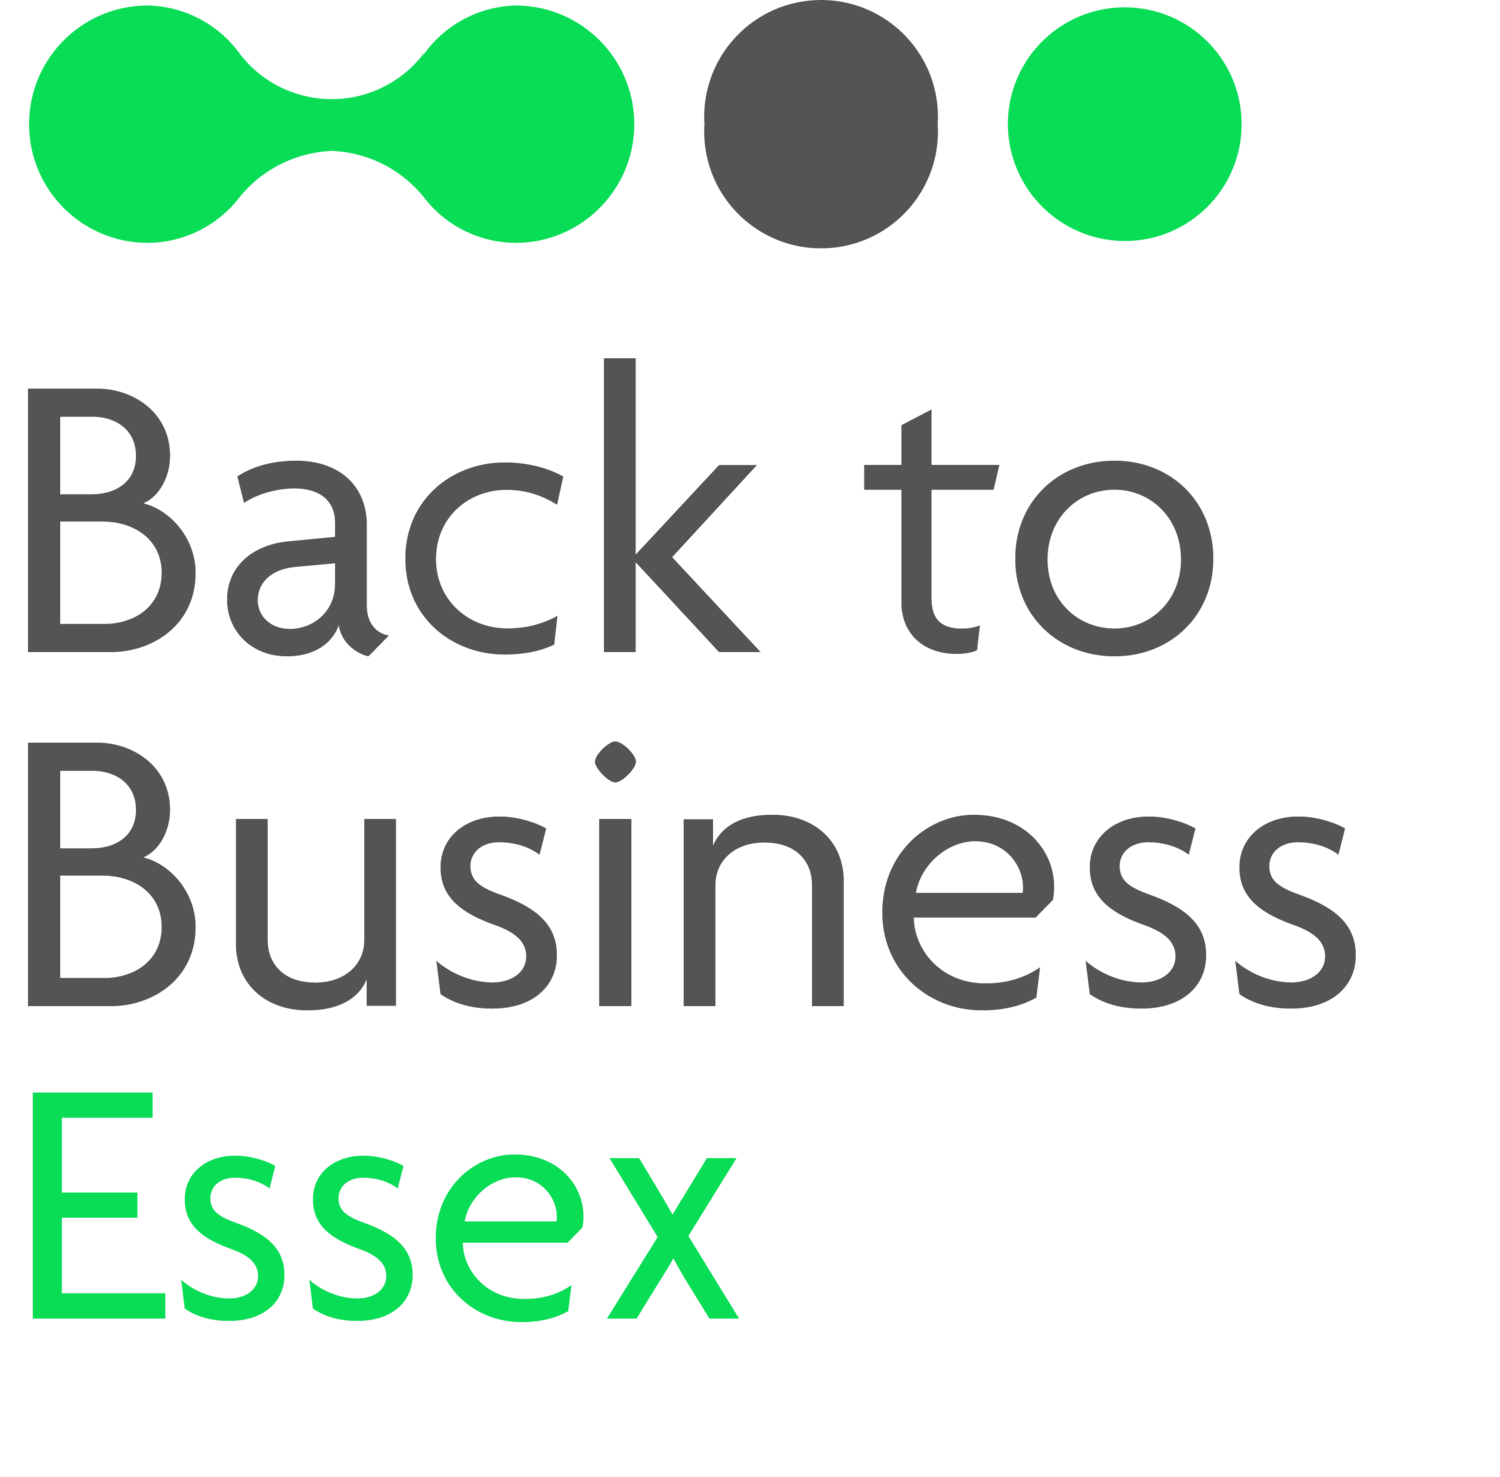 Back to Business Essex